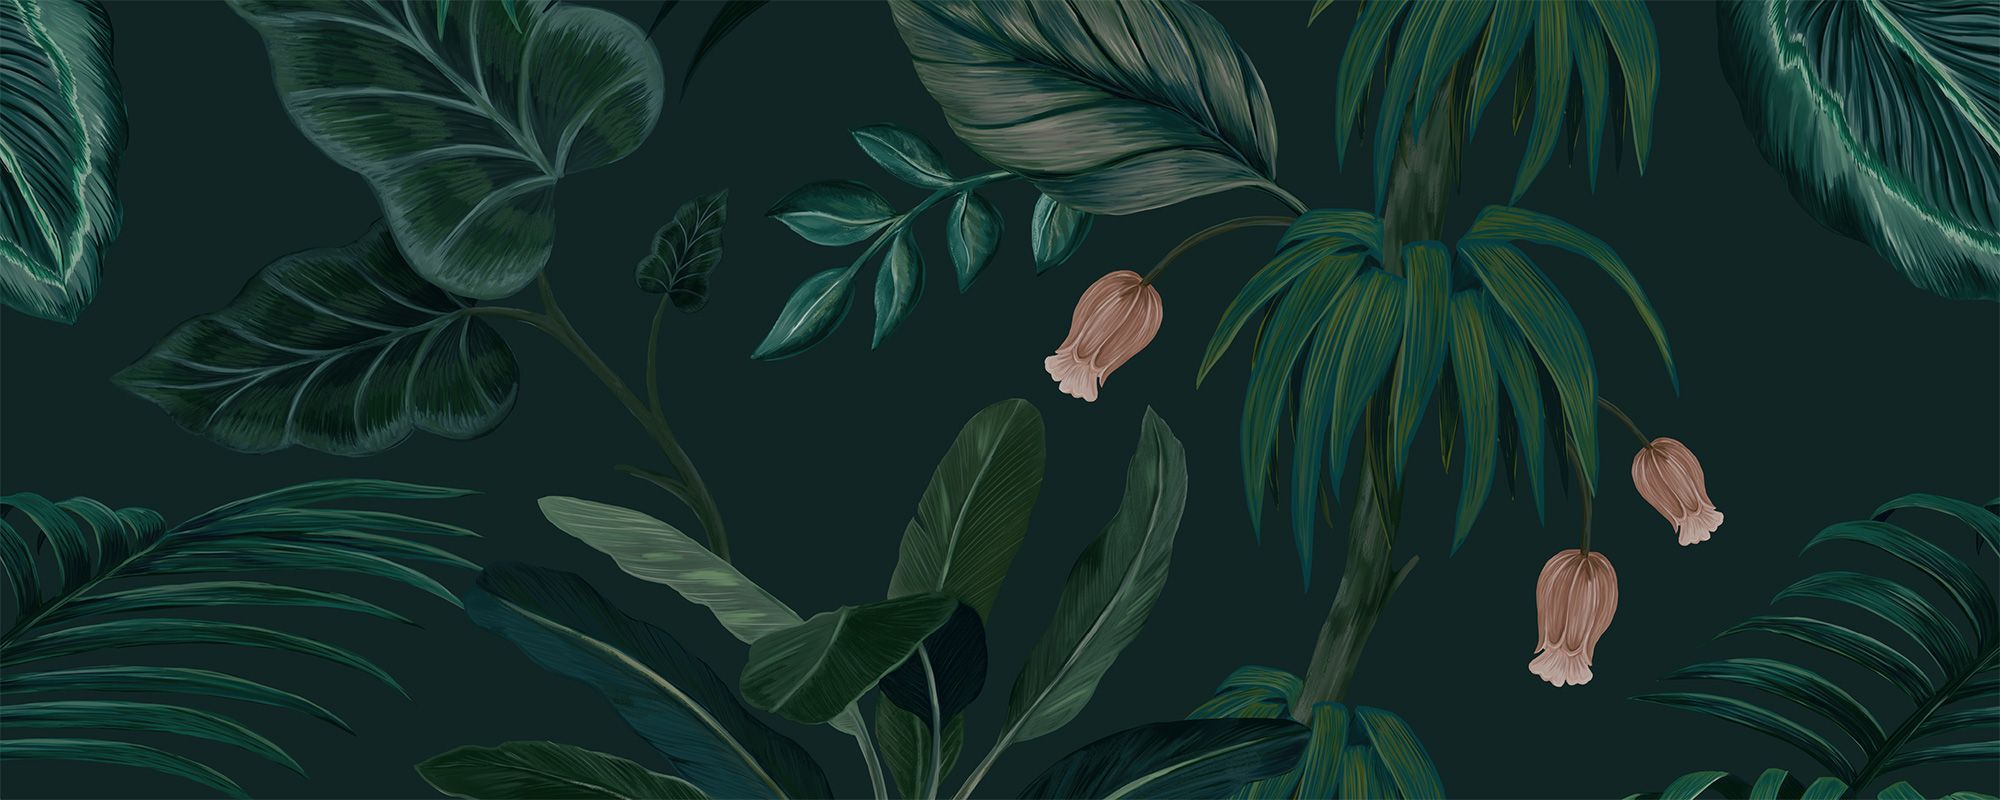 A wallpaper design featuring a dark green jungle with large leaves and flowers - Jungle